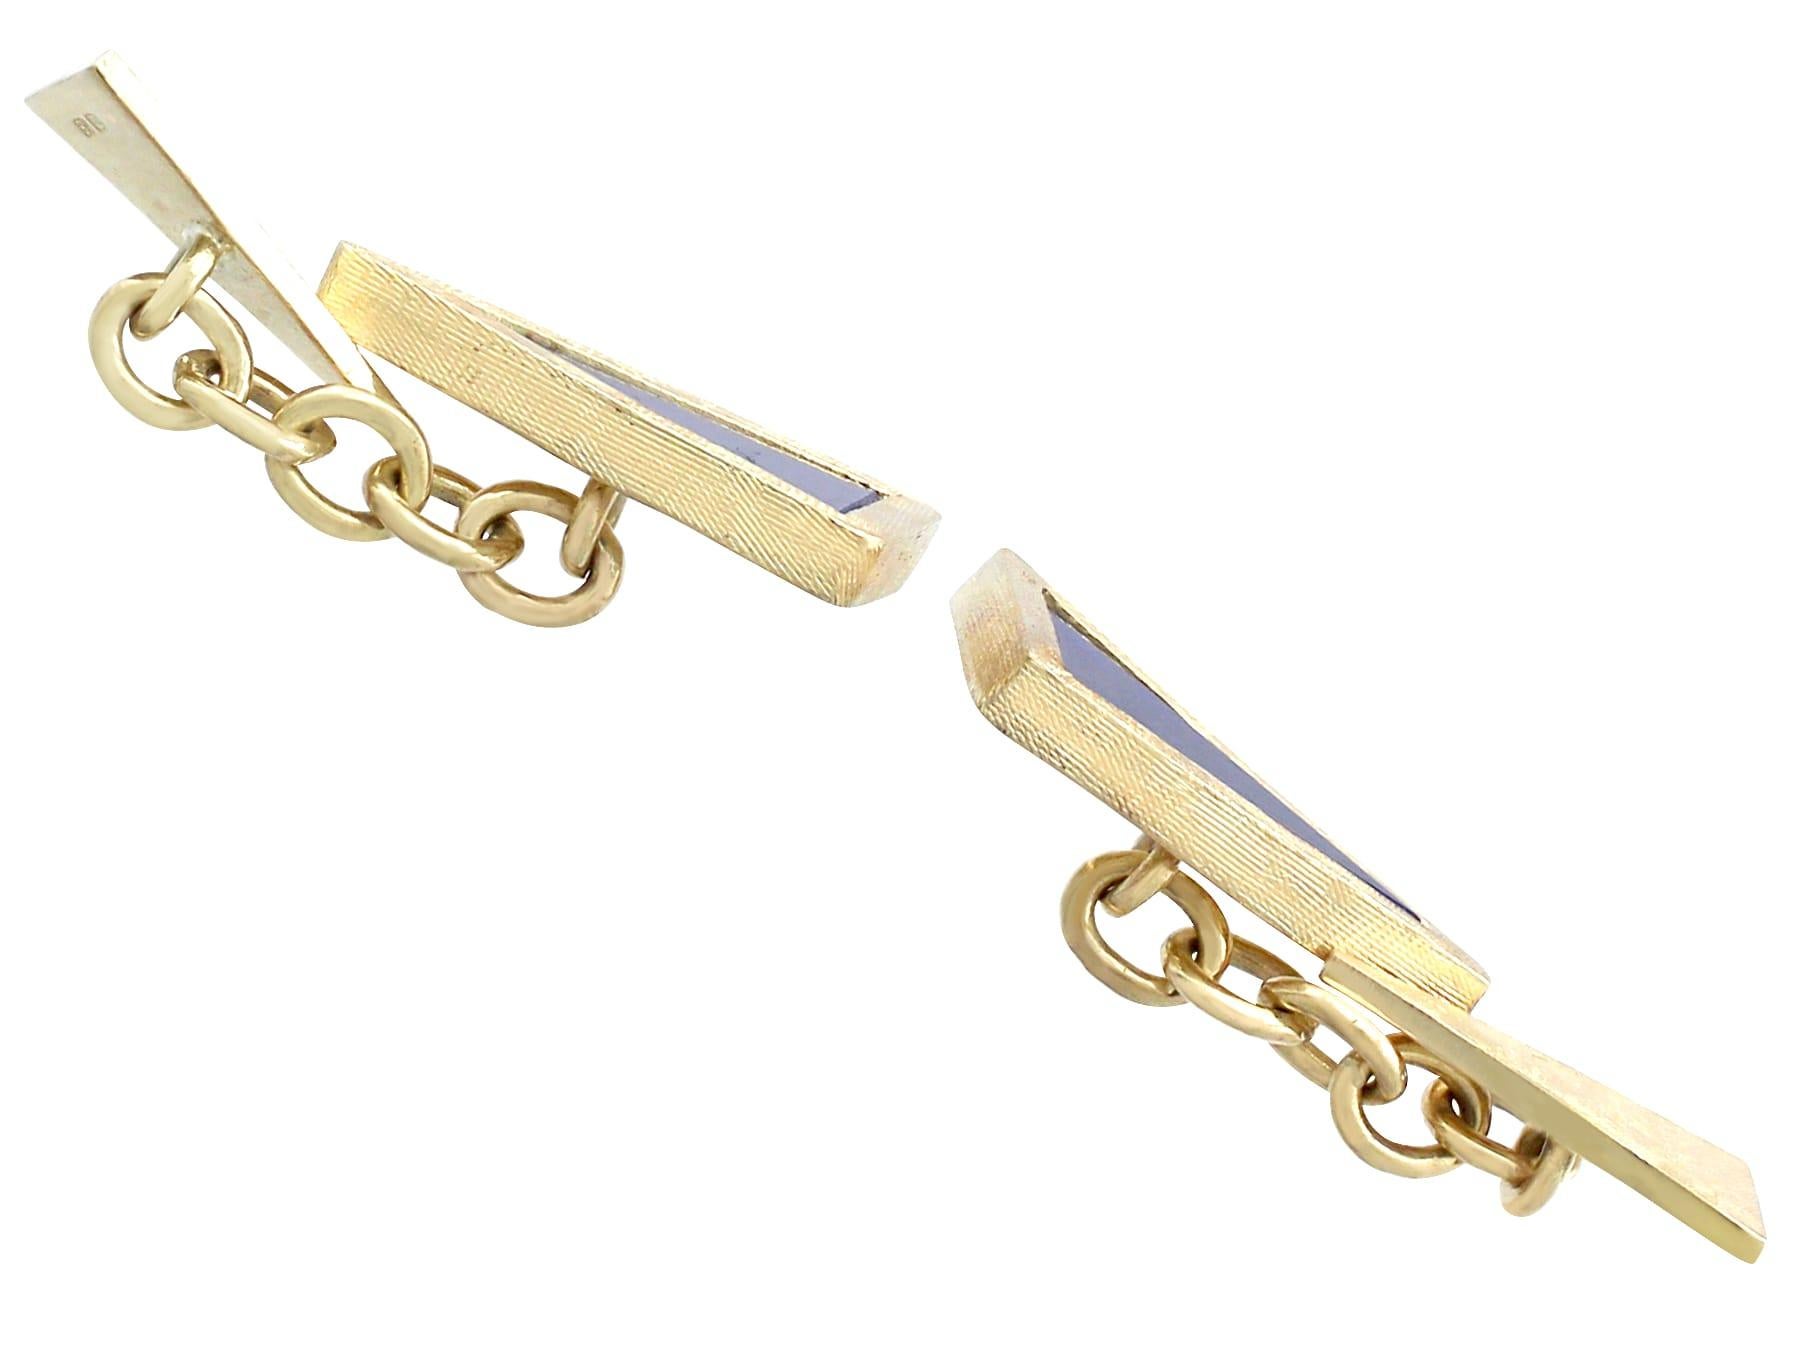 An impressive pair of vintage English lapis lazuli and 18 karat yellow gold cufflinks; part of our diverse men's jewelry collections.

These fine and impressive vintage lapis lazuli cufflinks have been crafted in 18k yellow gold.

The links have a